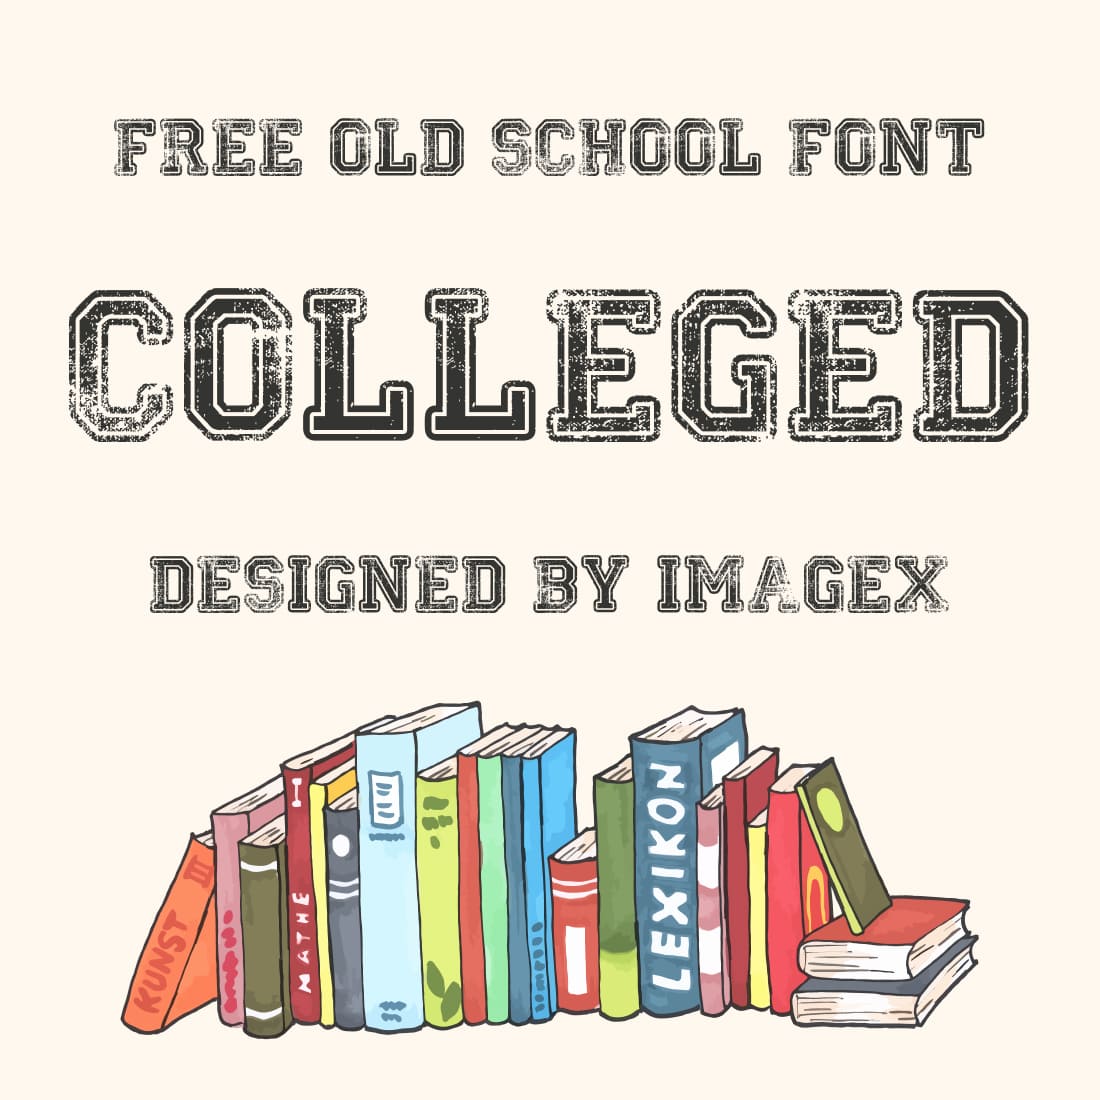 Watercolor illustration and vintage font look great together.